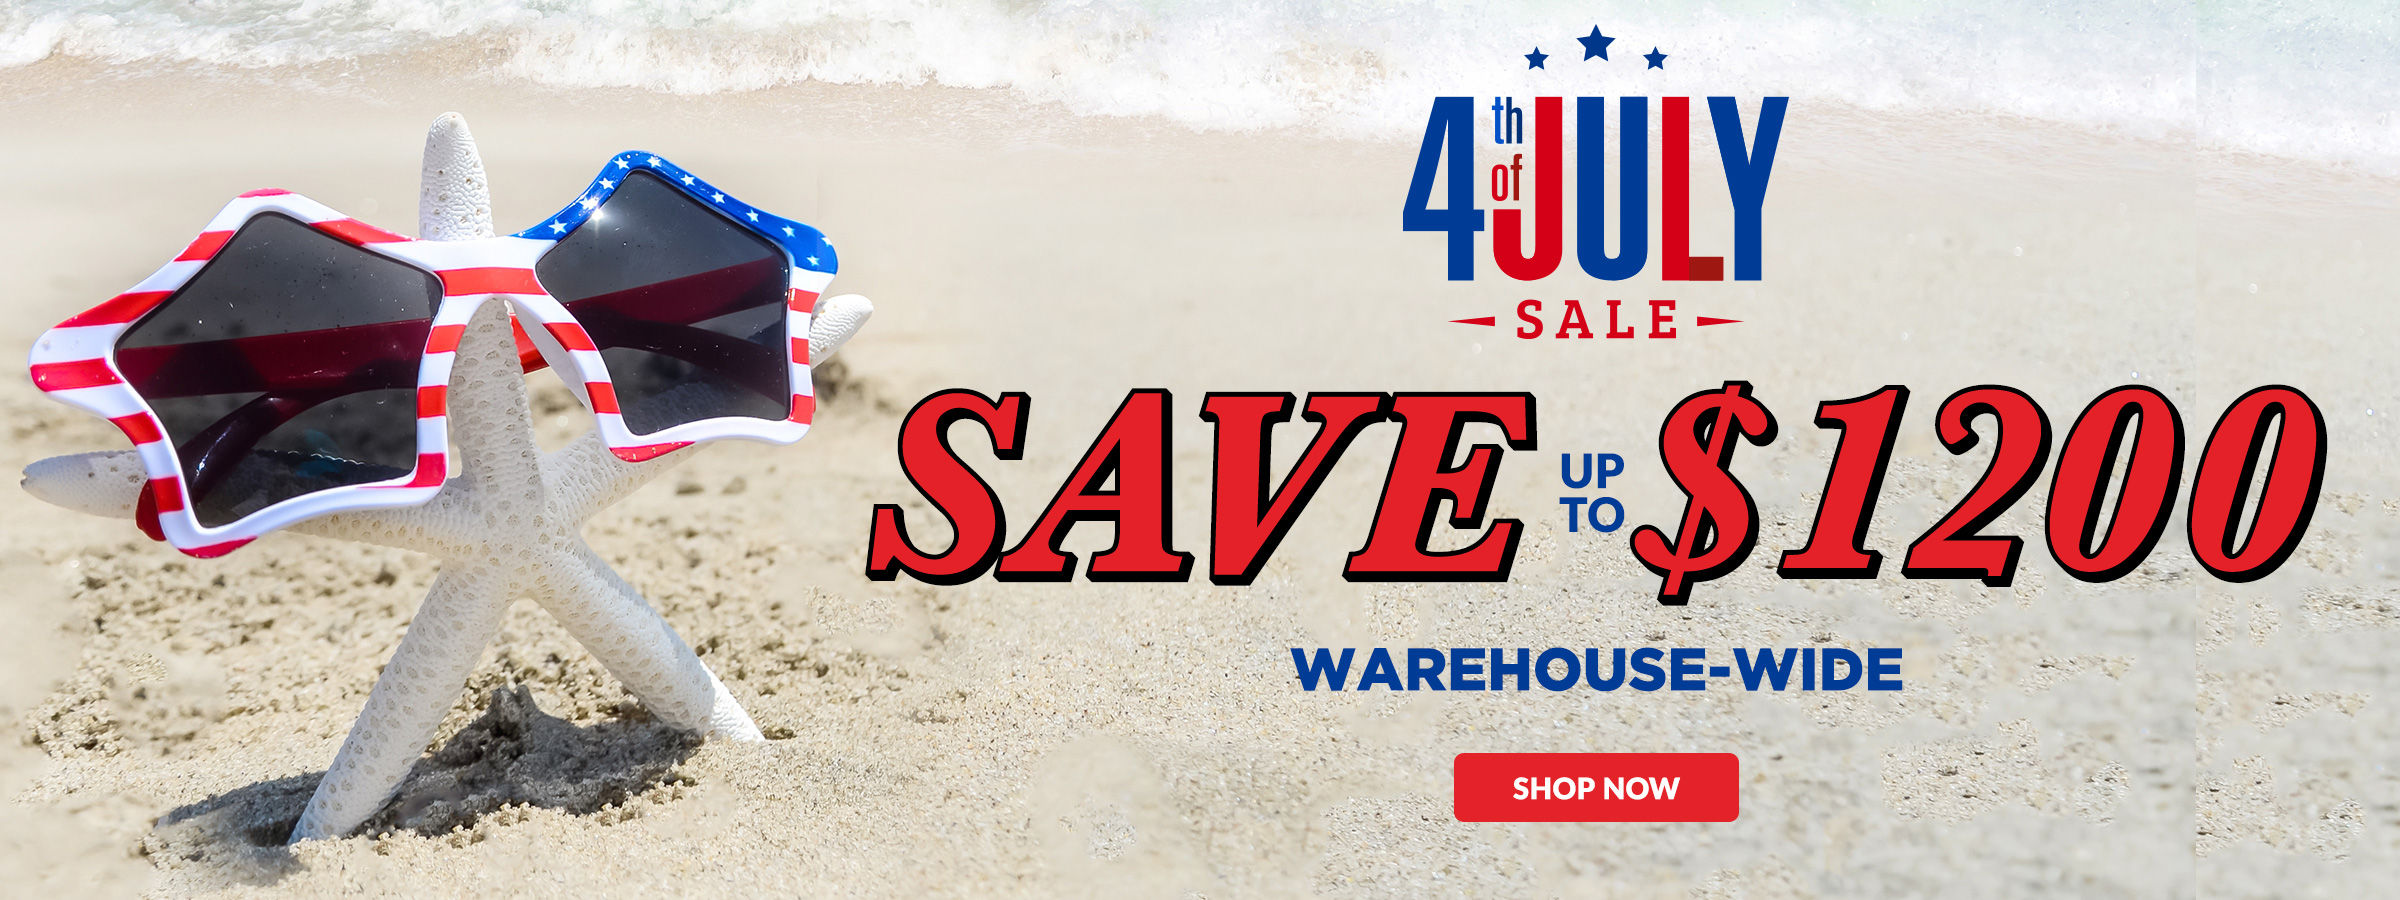 July 4th Sale Save up to $1200 Warehouse-Wide